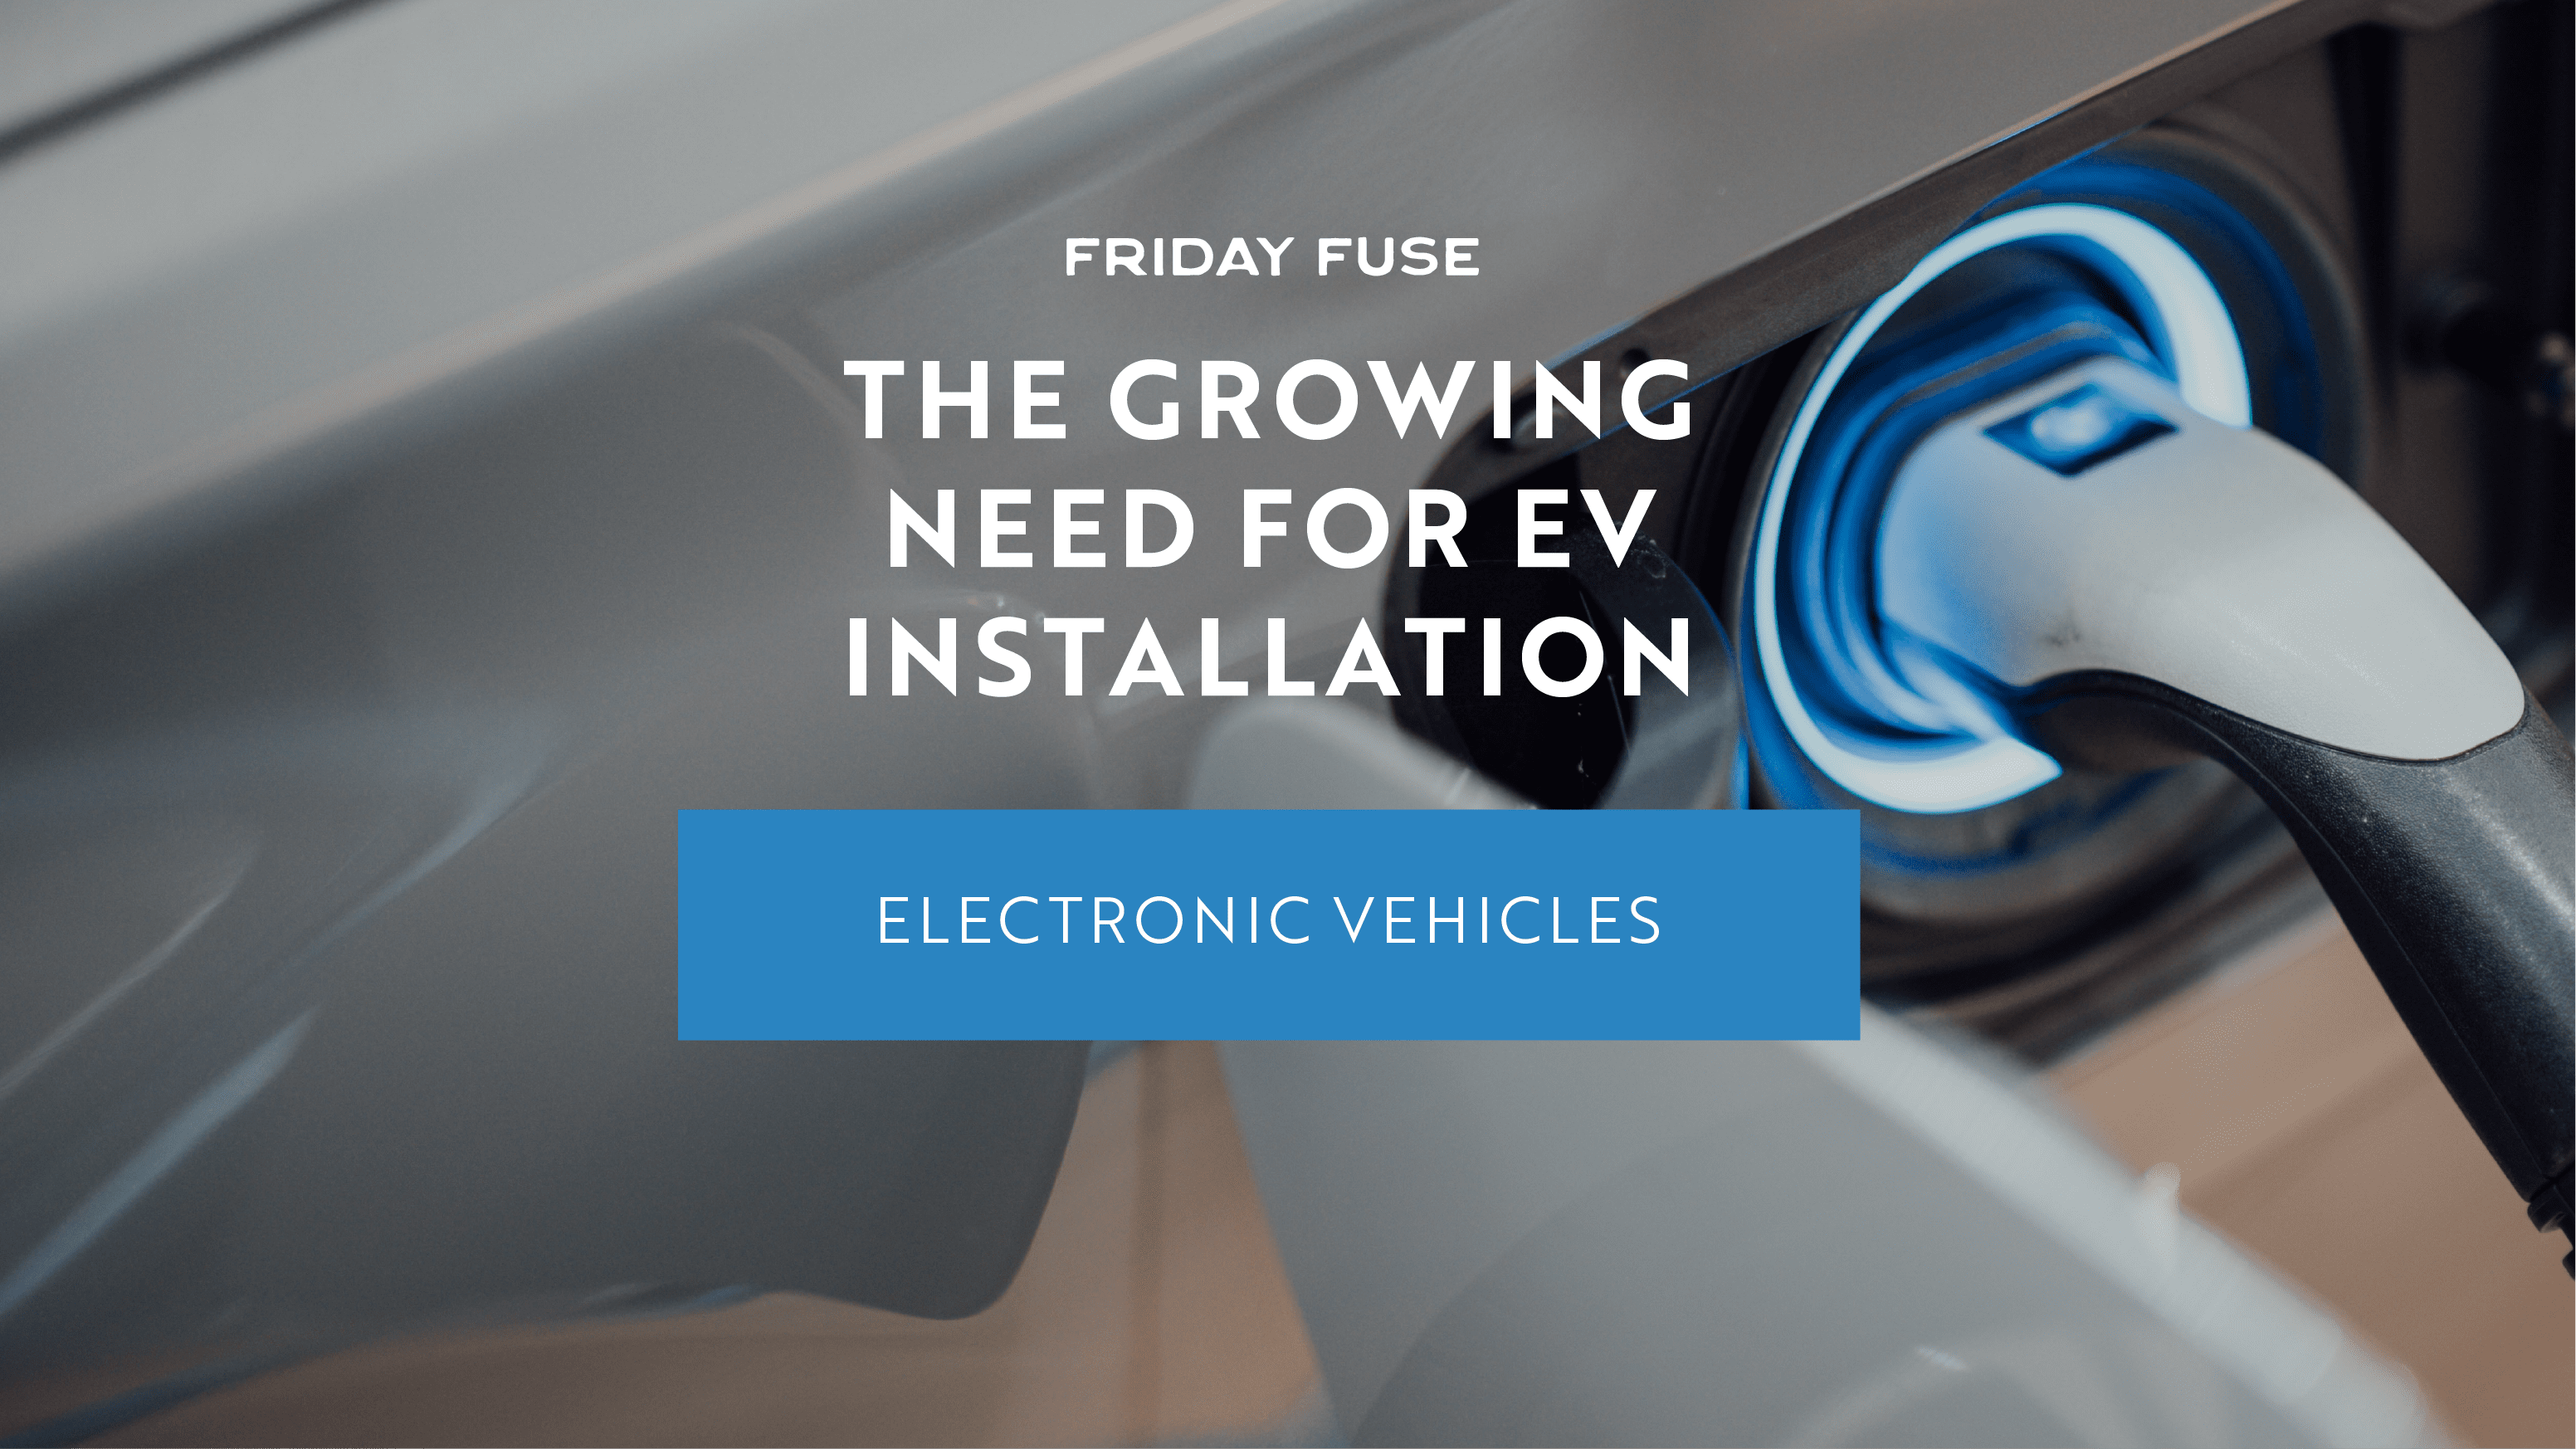 The Growing Need for EV Installation